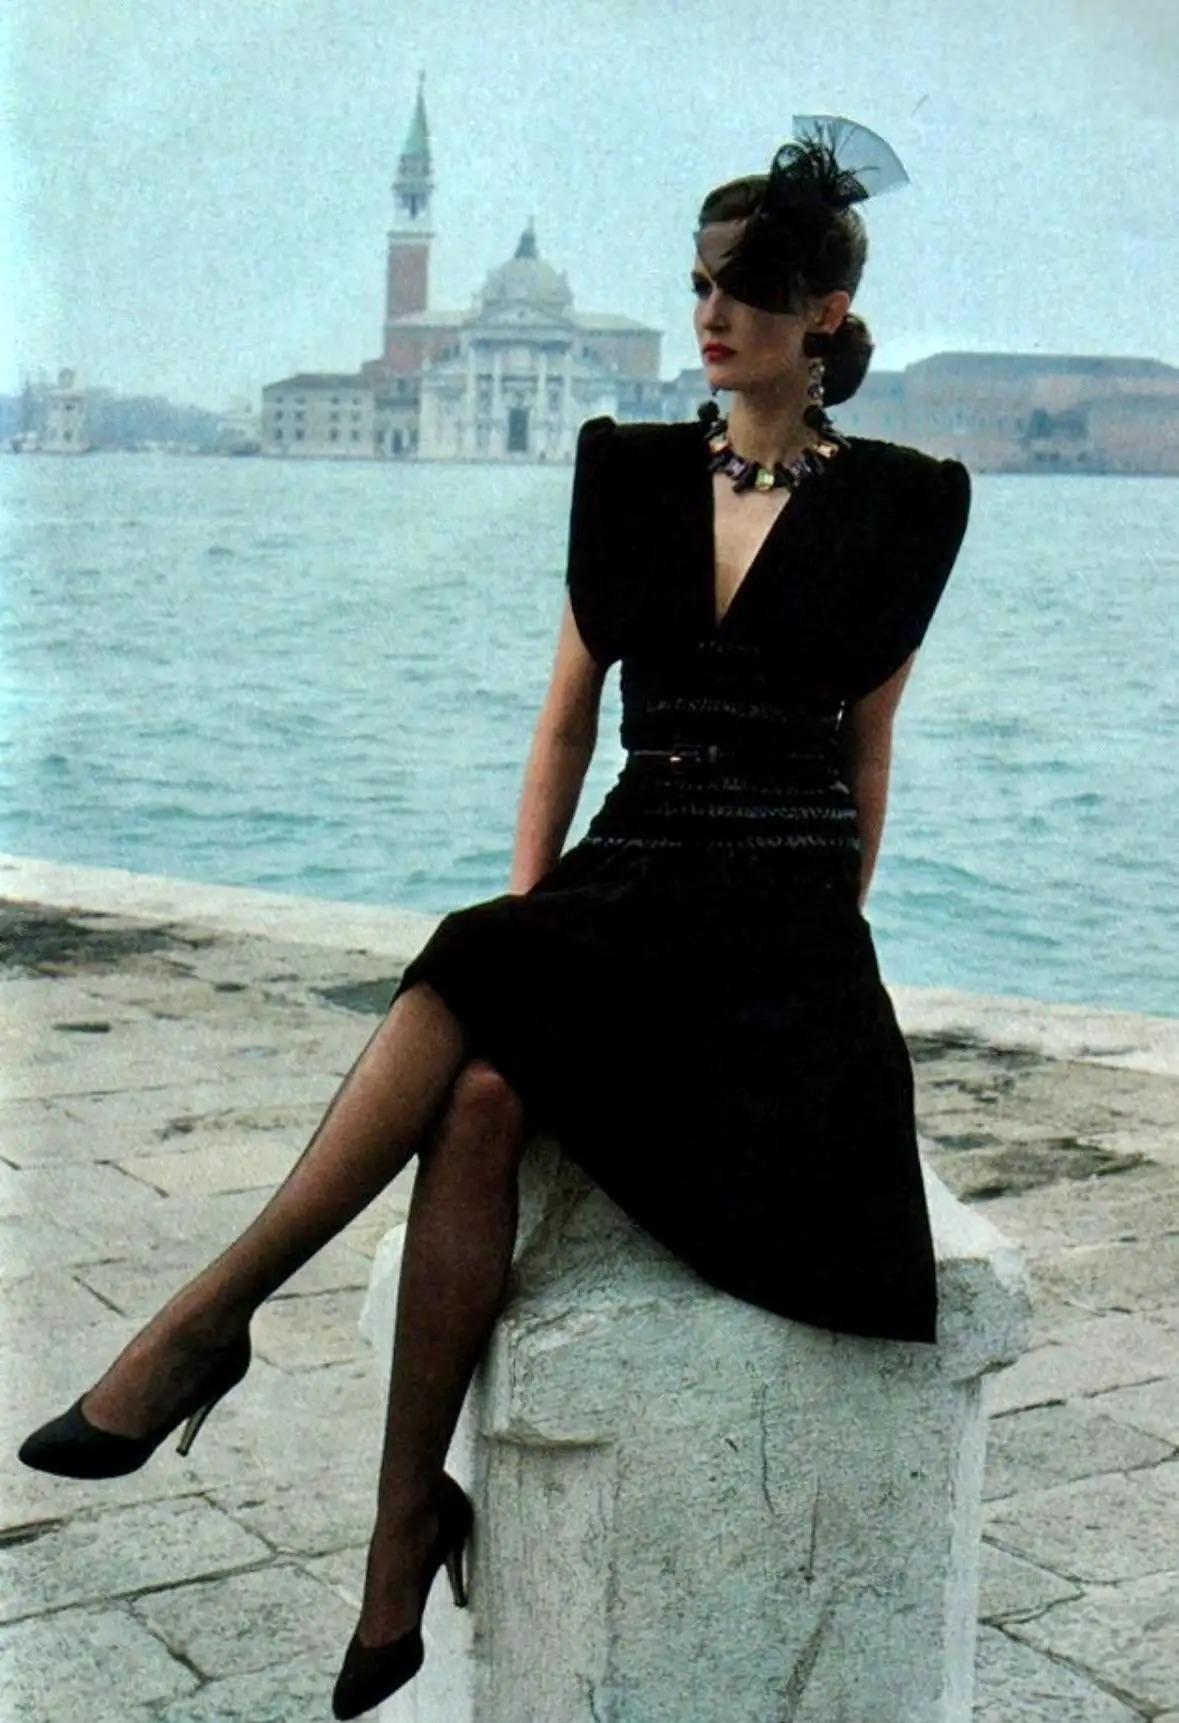 From the Fall/Winter 1983 collection, this fabulous black Saint Laurent Rive Gauche ruched dress, designed by Yves Saint Laurent was highlighted in the season's ad campaign, captured by Helmut Newton in Venice. Shoulder pads, deep V-plunging